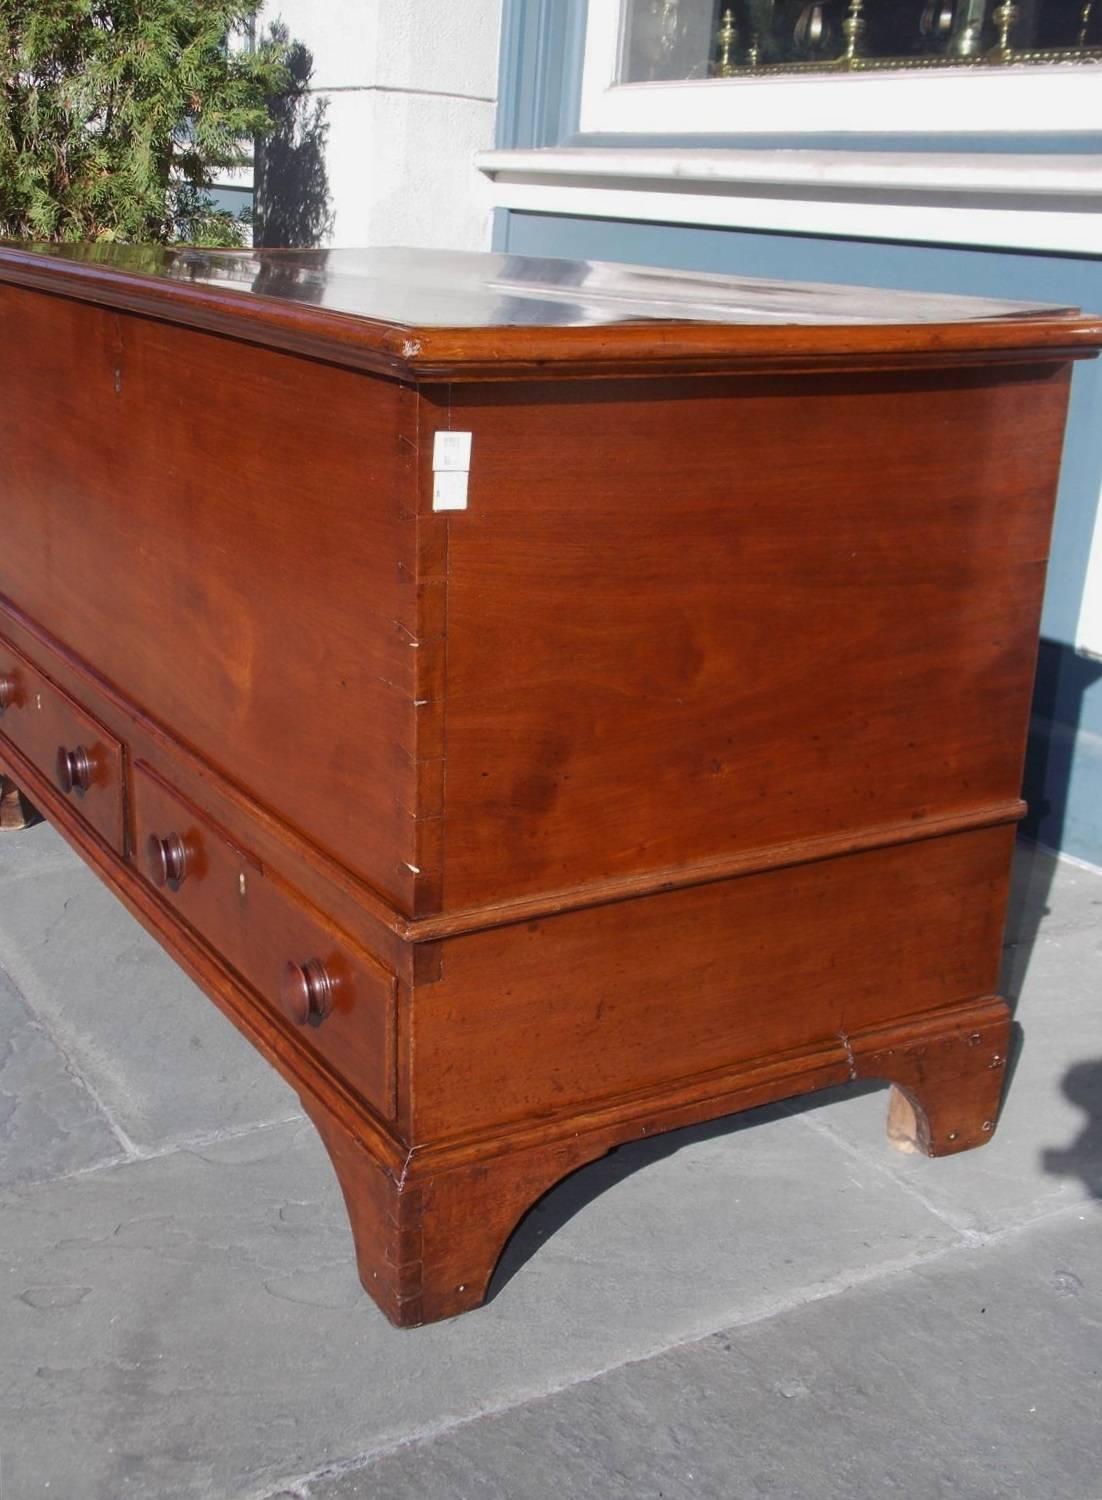 Late 18th Century American Chippendale Walnut Exposed Dovetail Blanket Chest, Circa 1770